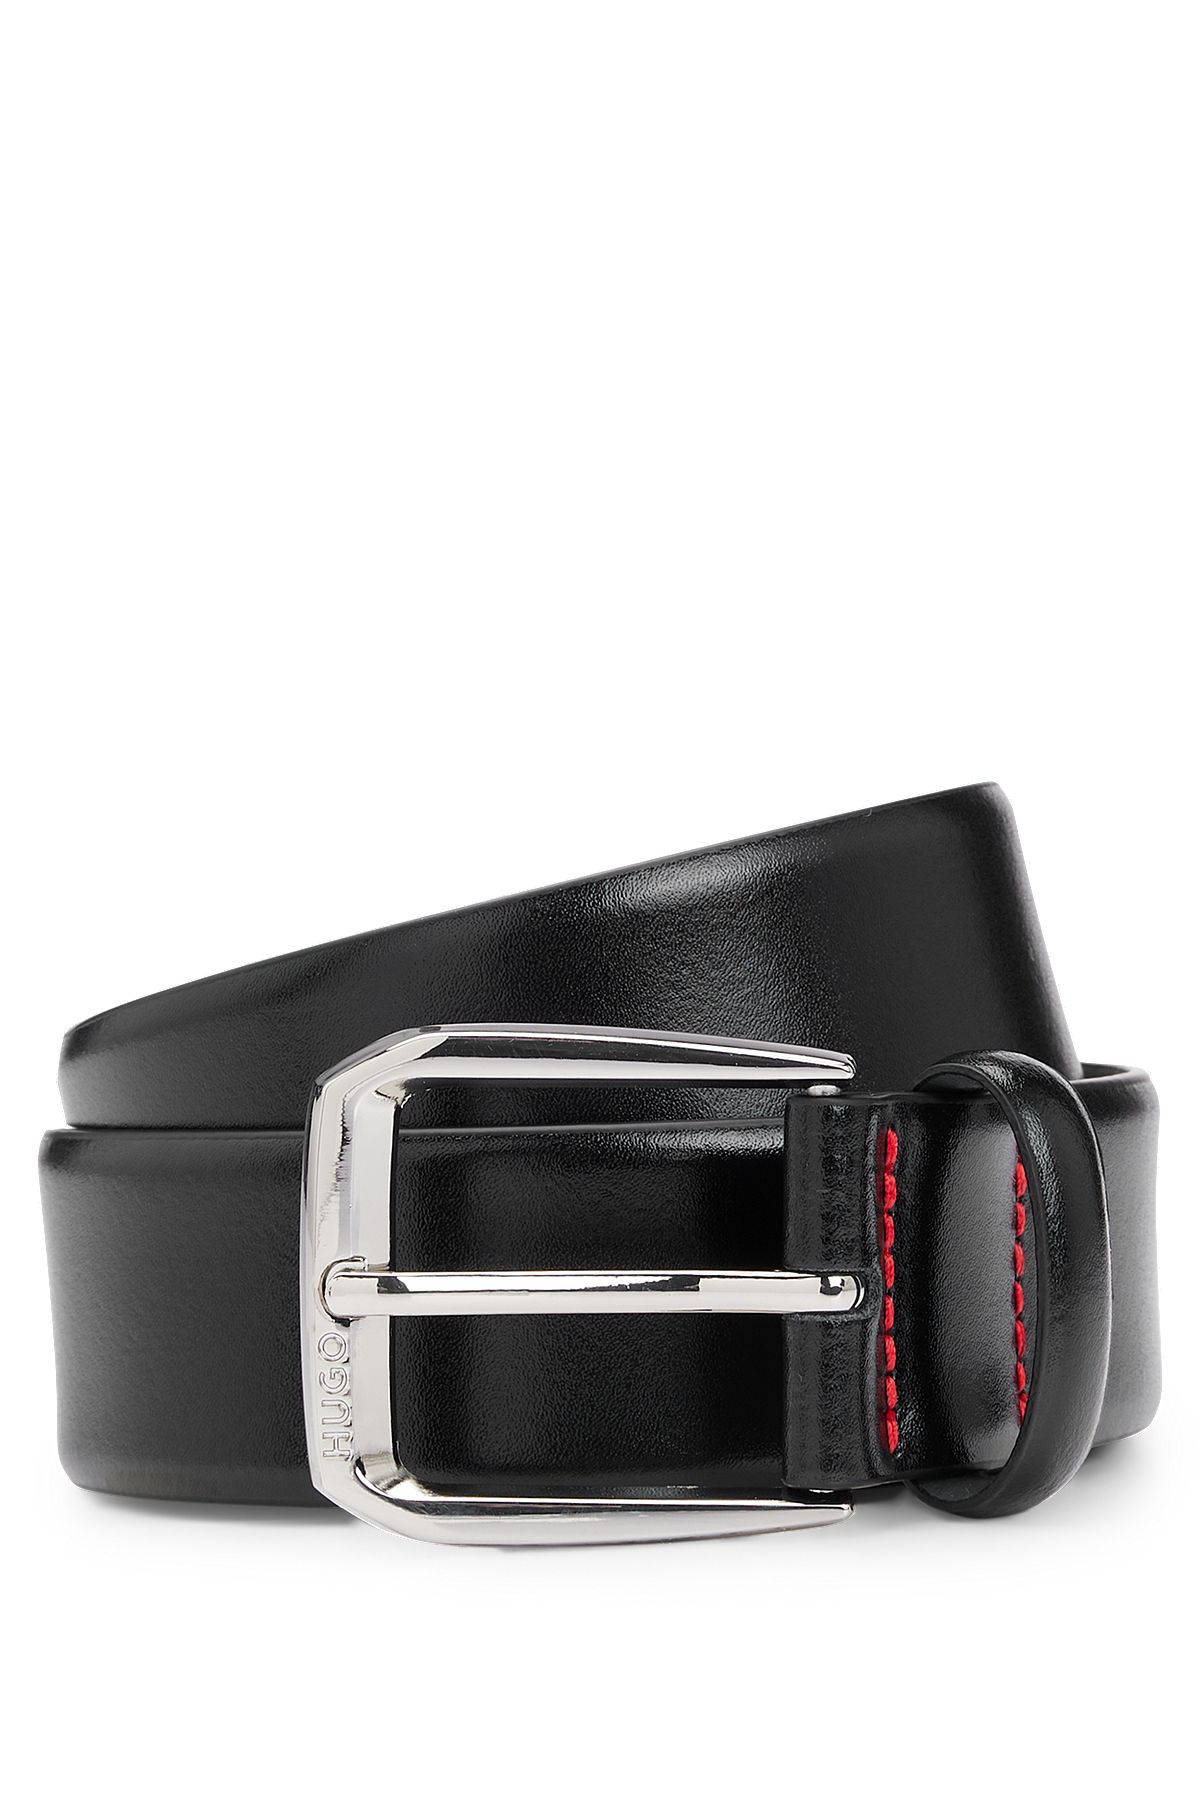 Italian-leather belt with branded buckle, Black